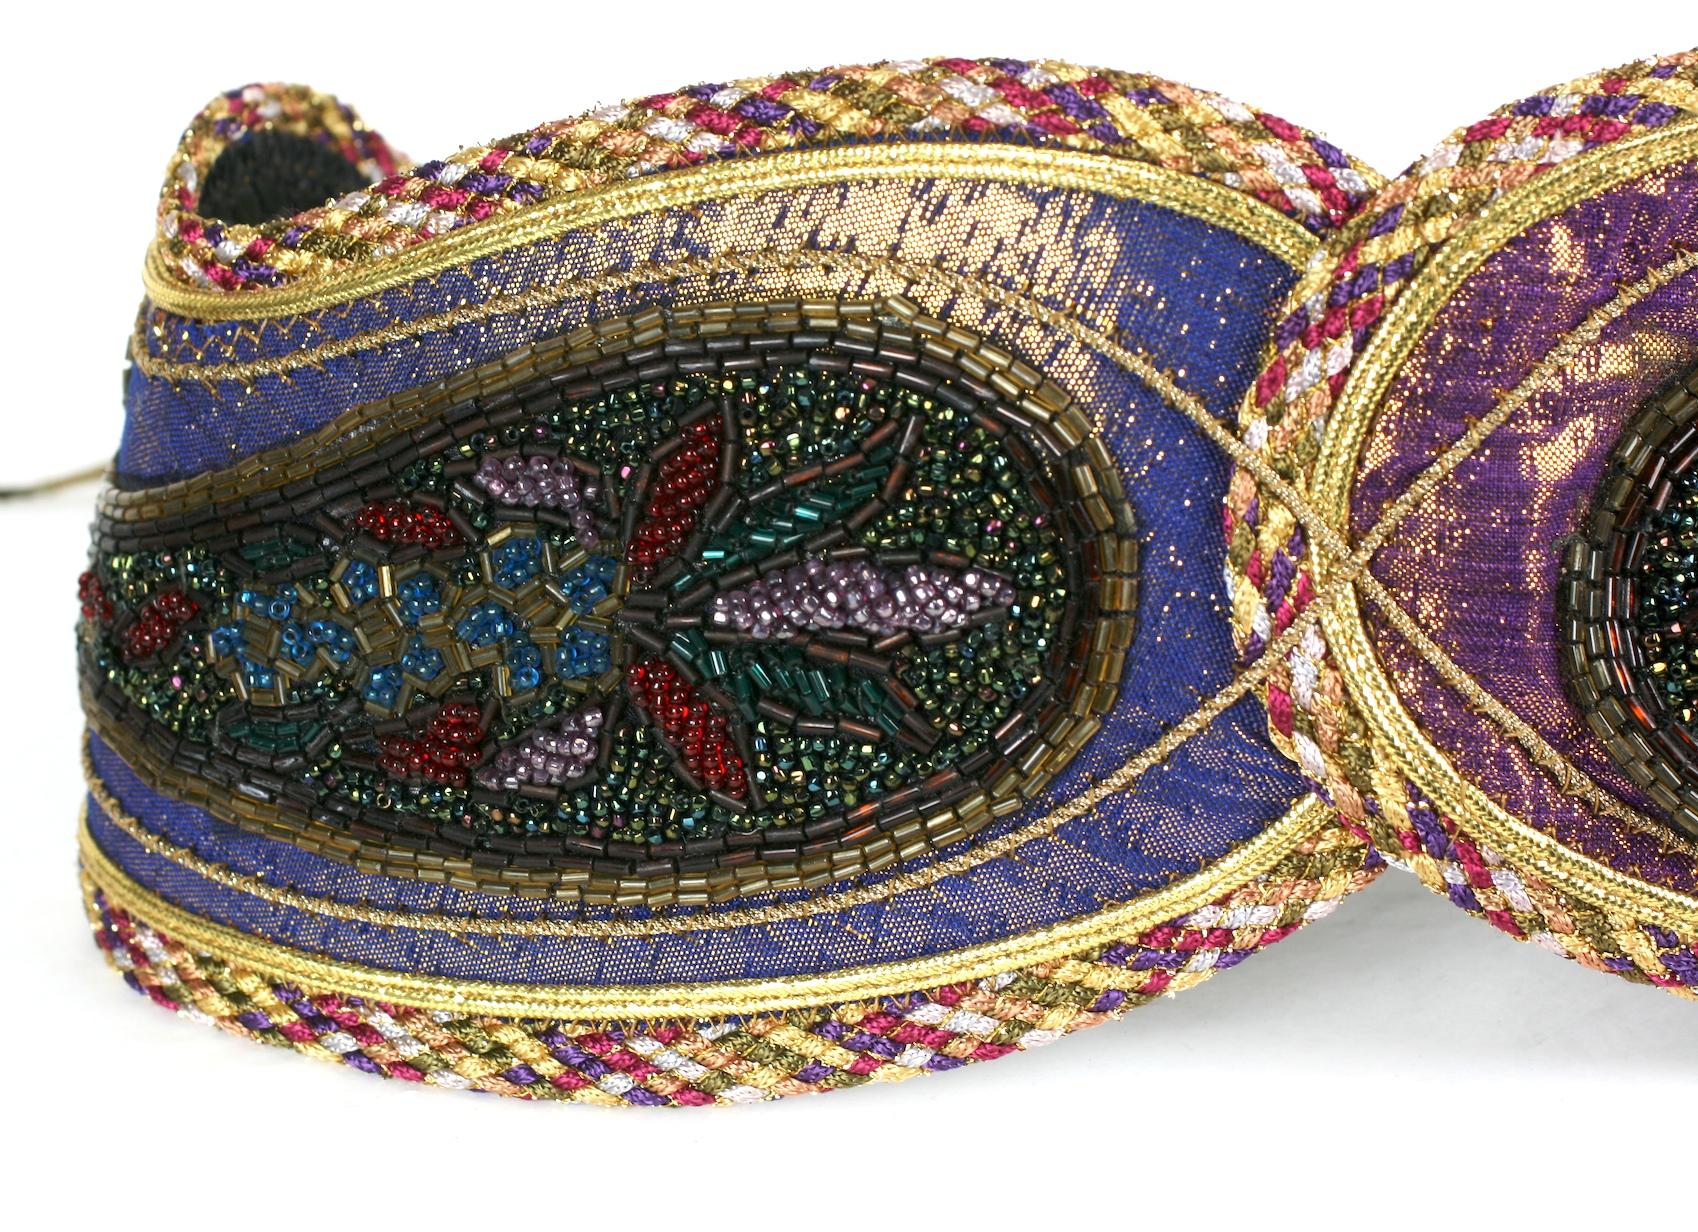 Lisandro Sarasola Extravagant Pieced Belt composed of paisley motifs which are overbeaded with lame cording, lame and applique. Bronze gold leather ties close the belt on the back. Wonderful colorations.
Super striking, would enliven a monochromatic